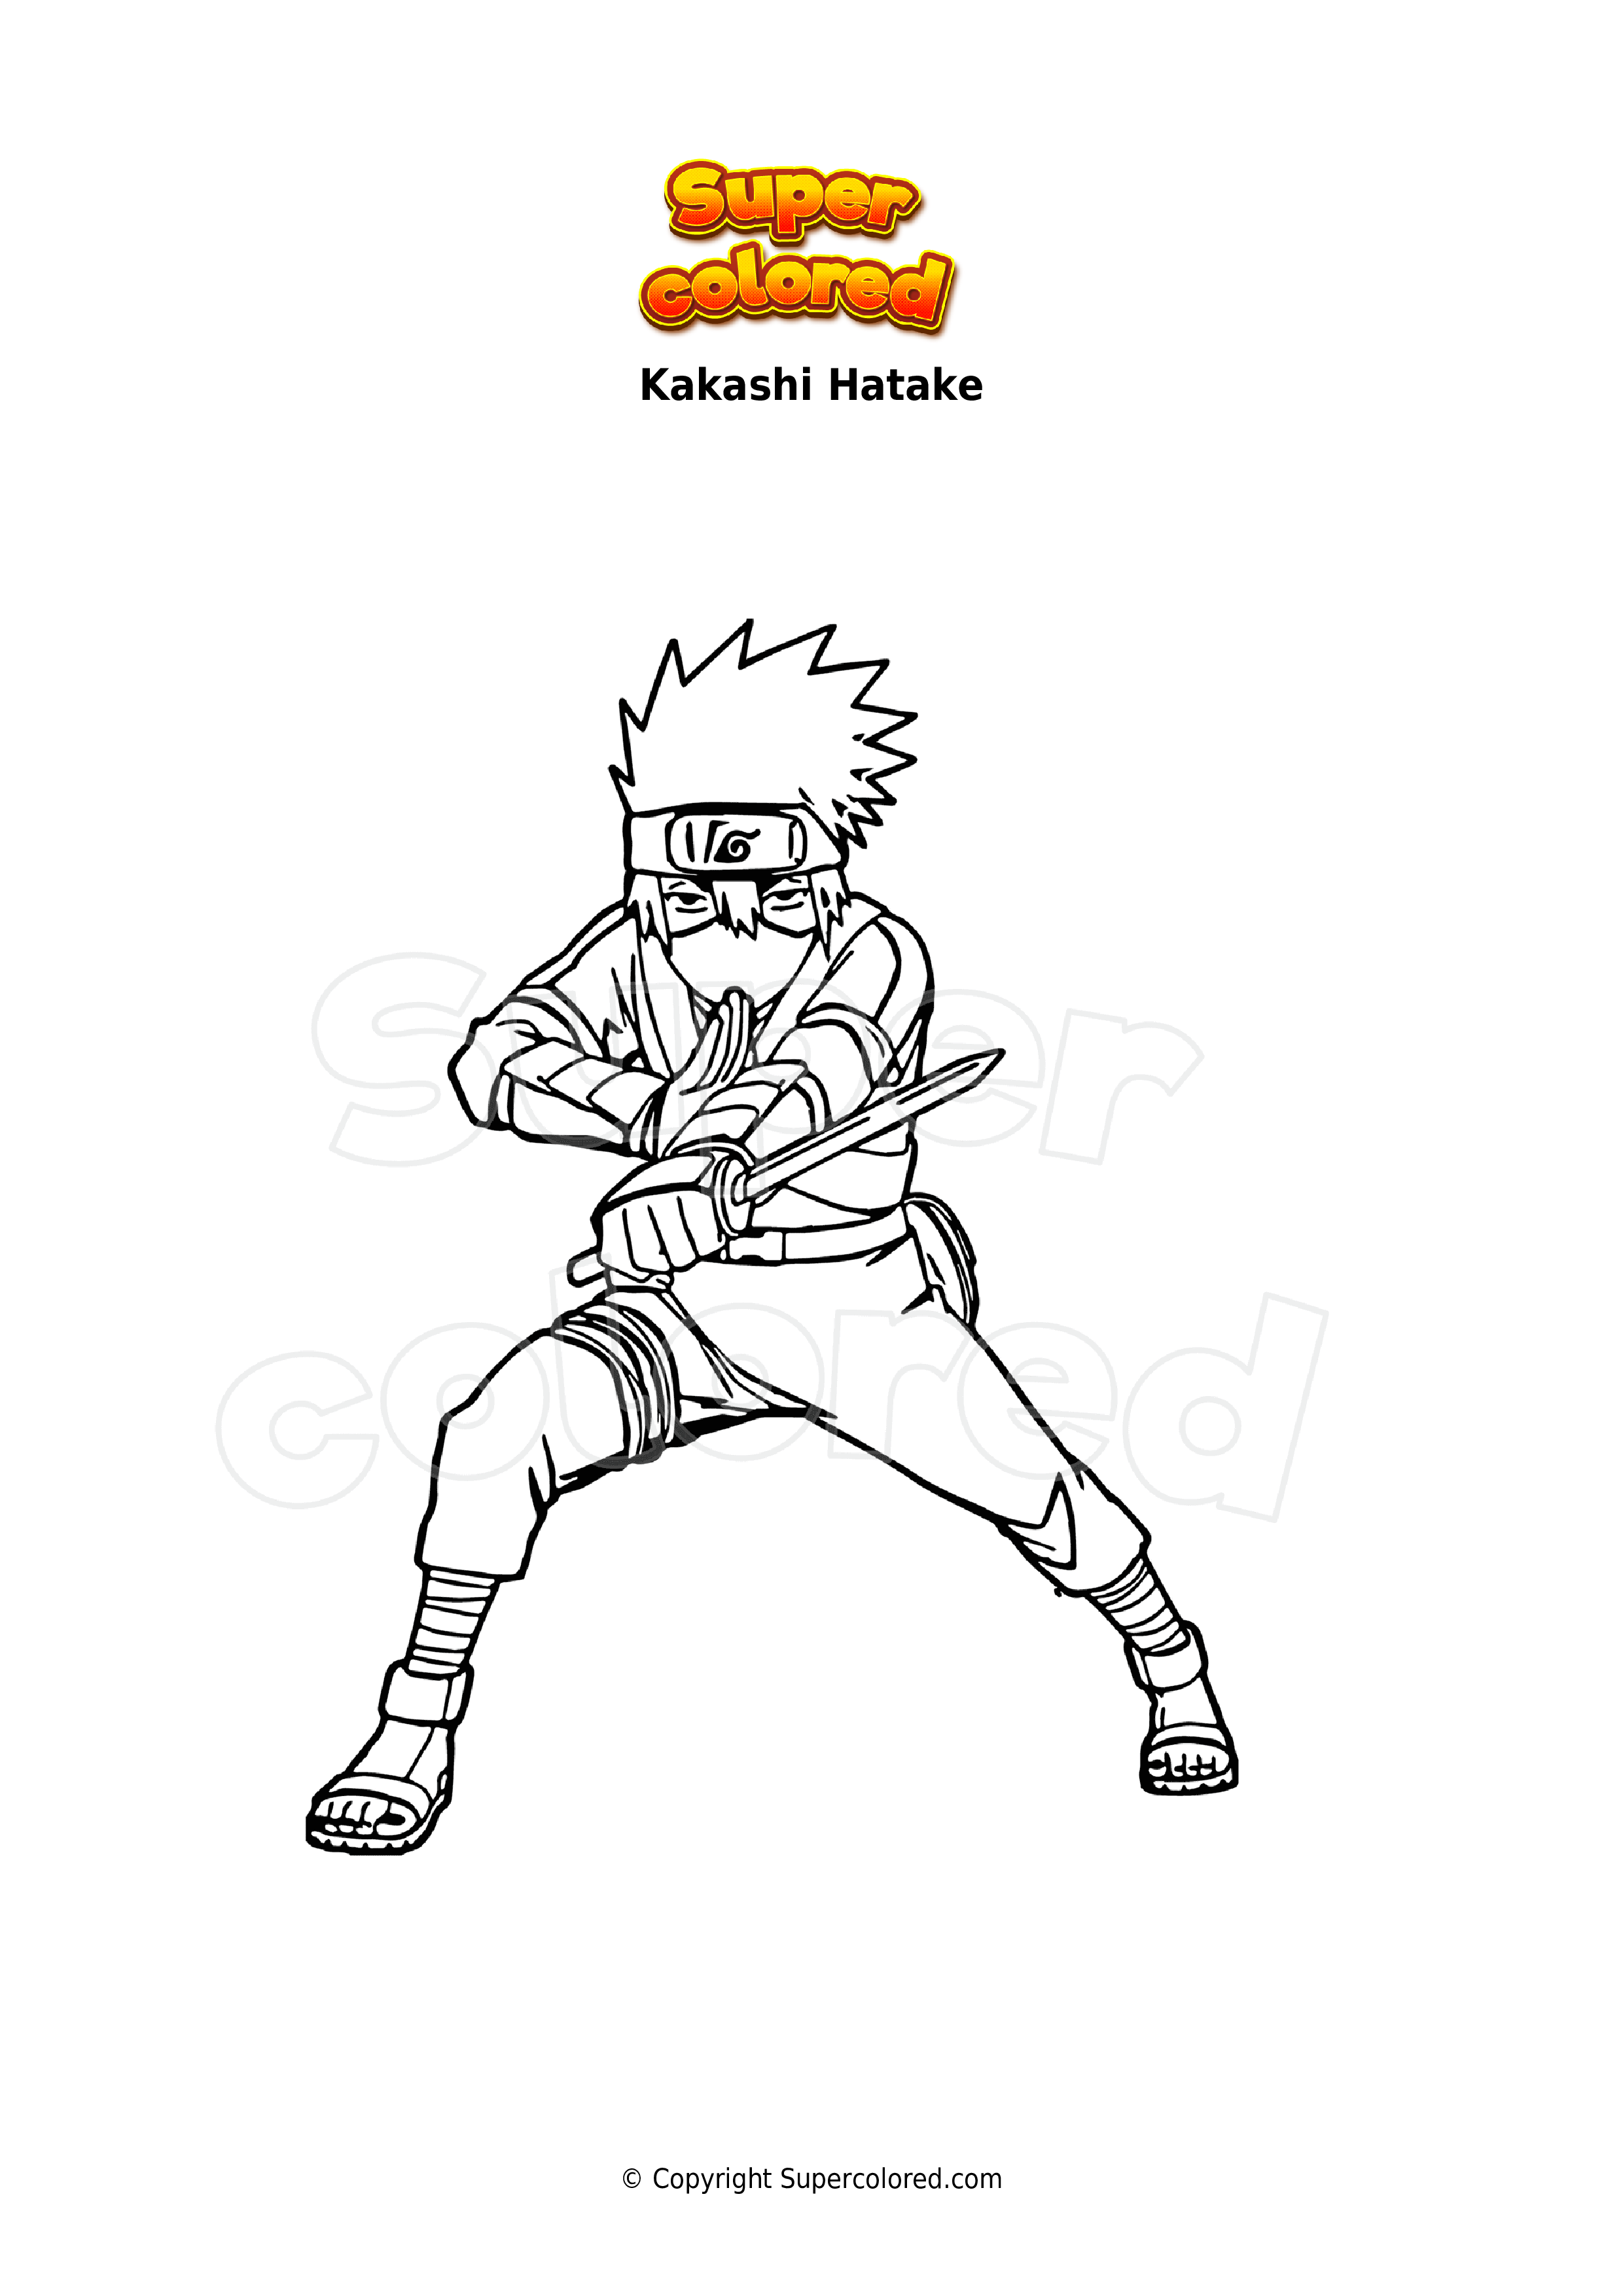 Namikaze Minato in Anime Naruto coloring page - Download, Print or Color  Online for Free